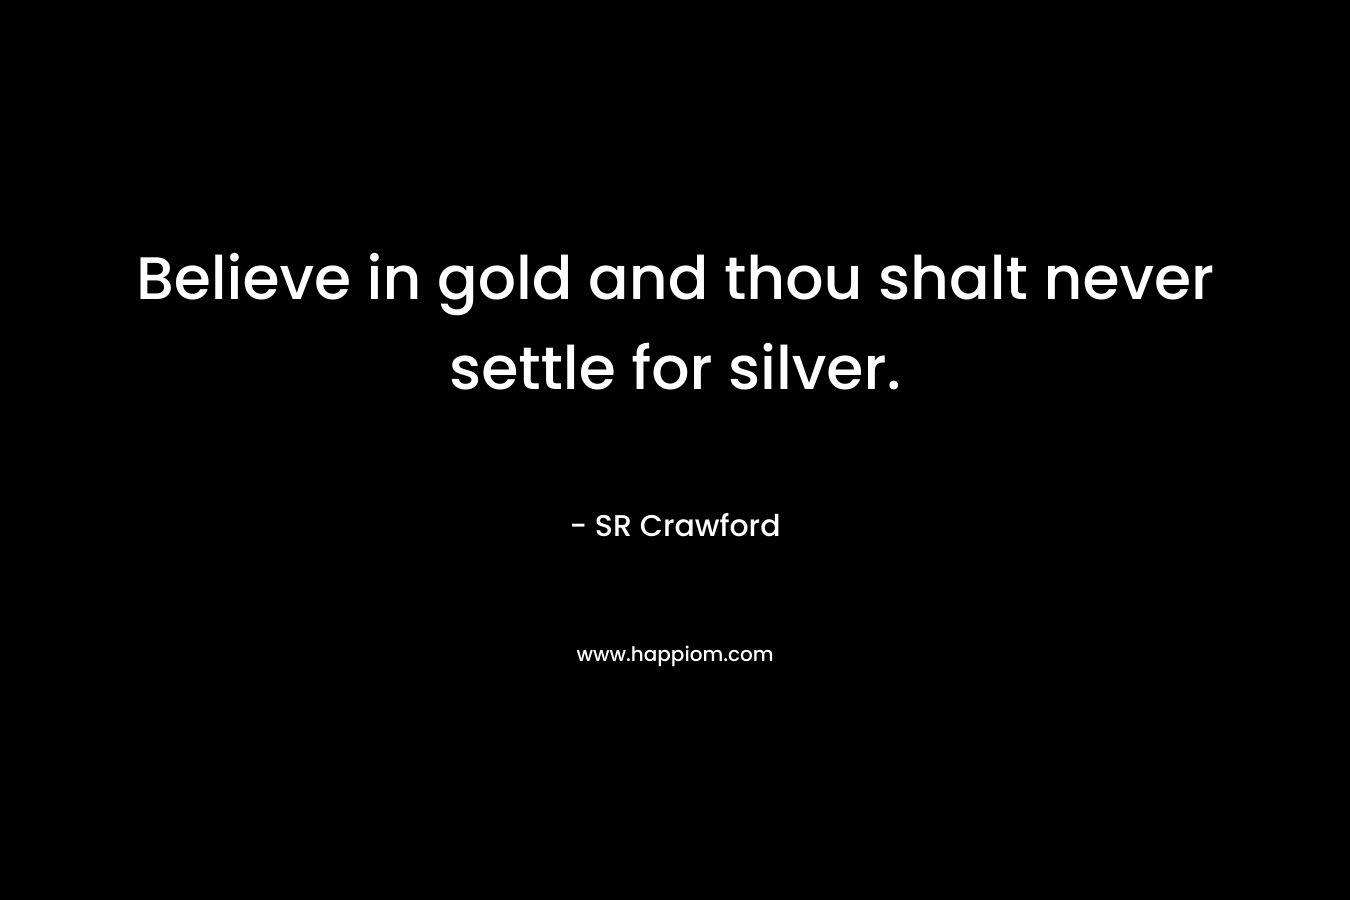 Believe in gold and thou shalt never settle for silver.